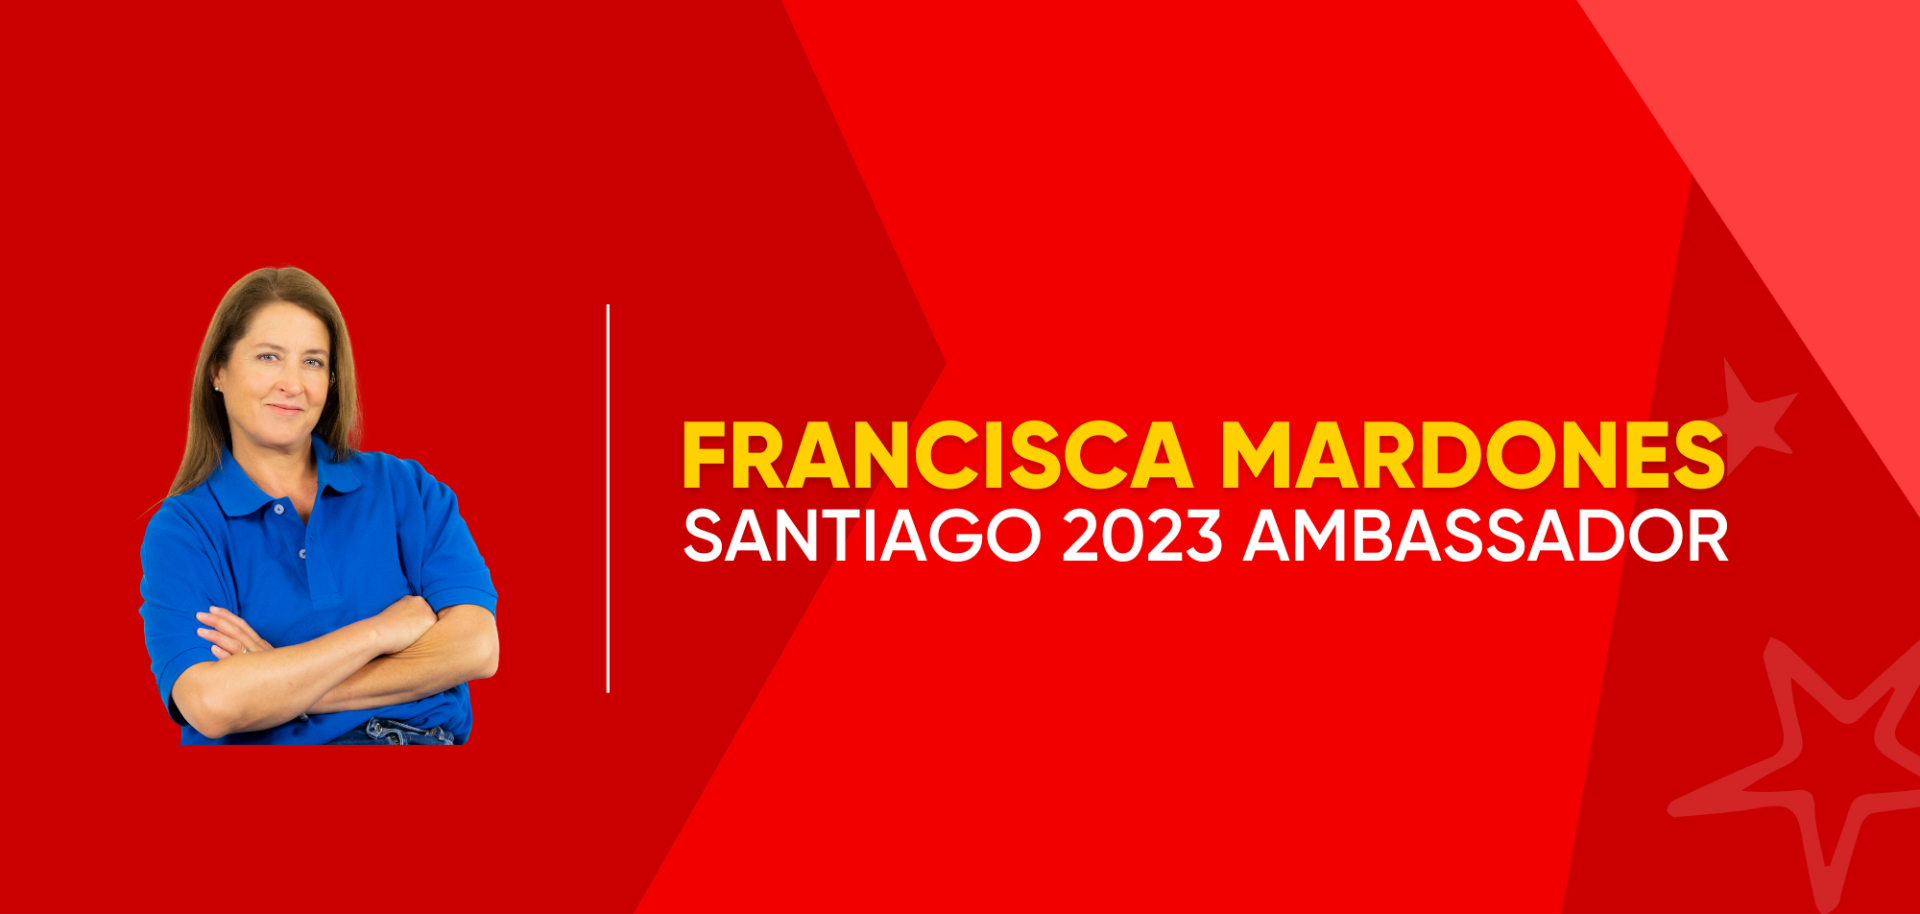 Francisca Mardones joins the ambassadors team. (Picture from: Santiago 2023).